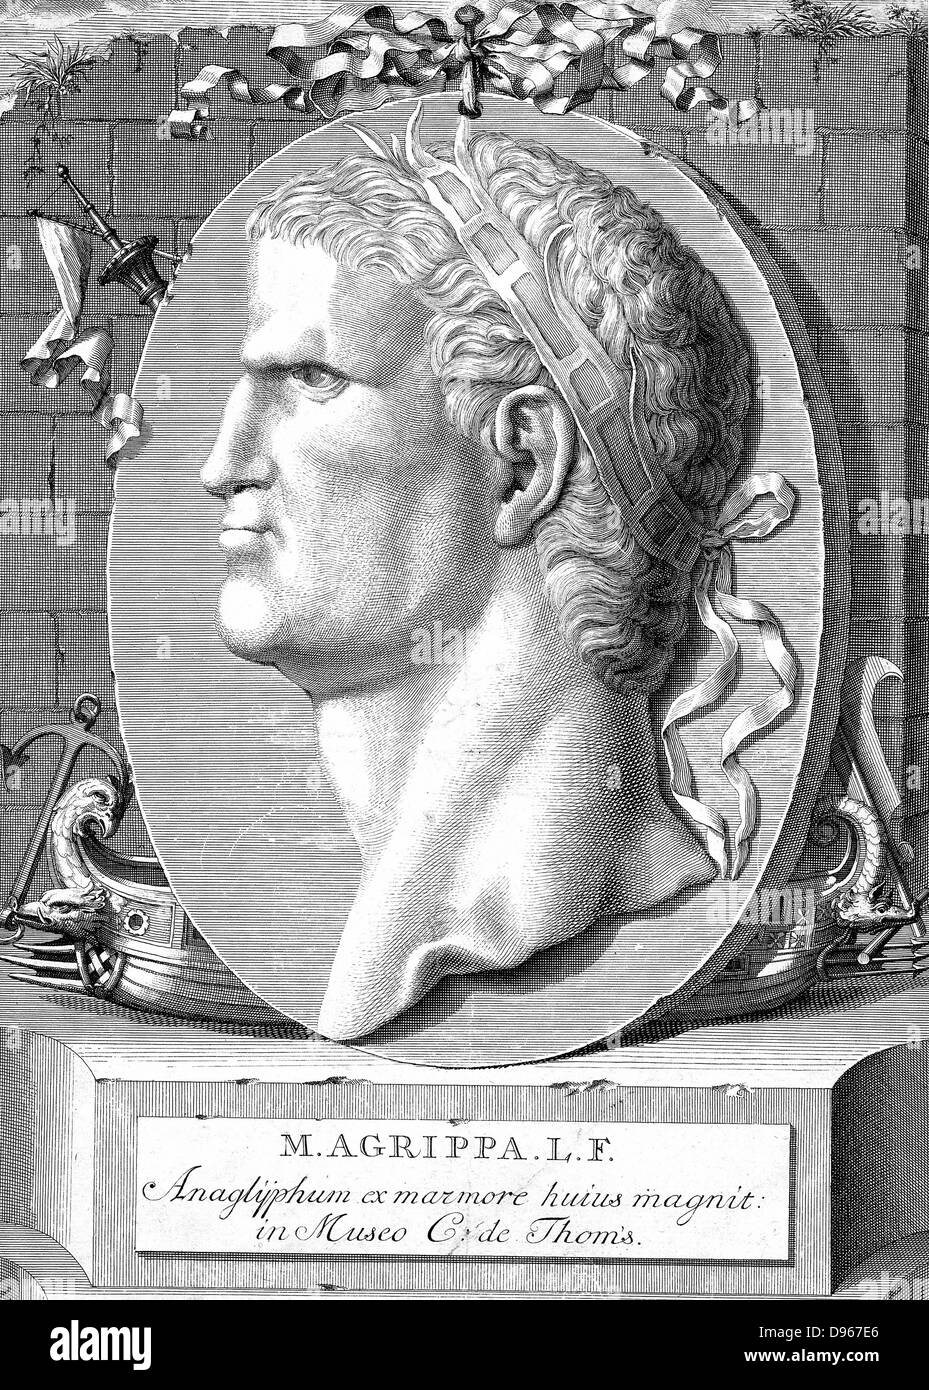 Marcus Vipsanius Agrippa (63-12 BC) Roman statesman and naval and military commander. Friend, son-in-law, and deputy of Emperor Augustus.  The  warship in the background refers to his naval victories at Mylae and Naulochus (36 BC) and against Antony at Actium (31 BC). Copperplate engraving. Stock Photo